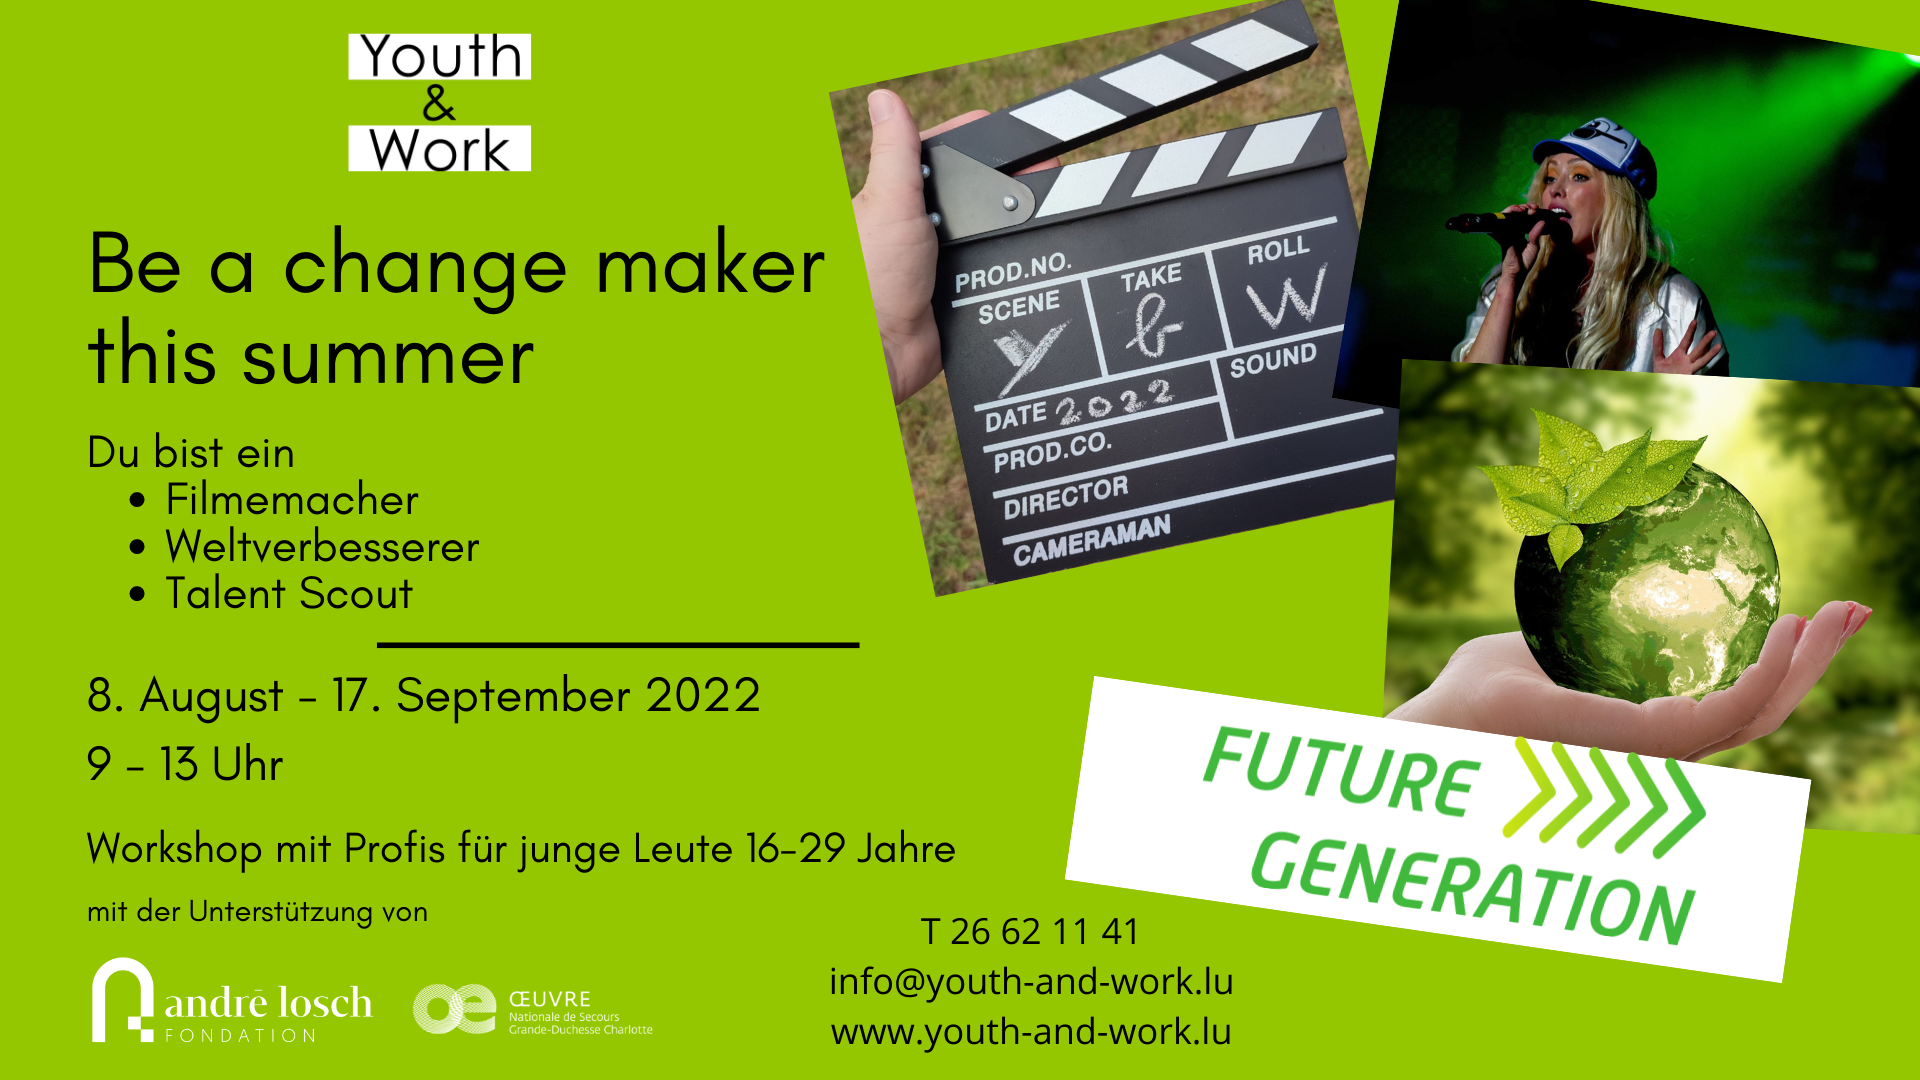 "Be a change maker this summer" eis nächste Projet Future Generation ab 08.08.2022